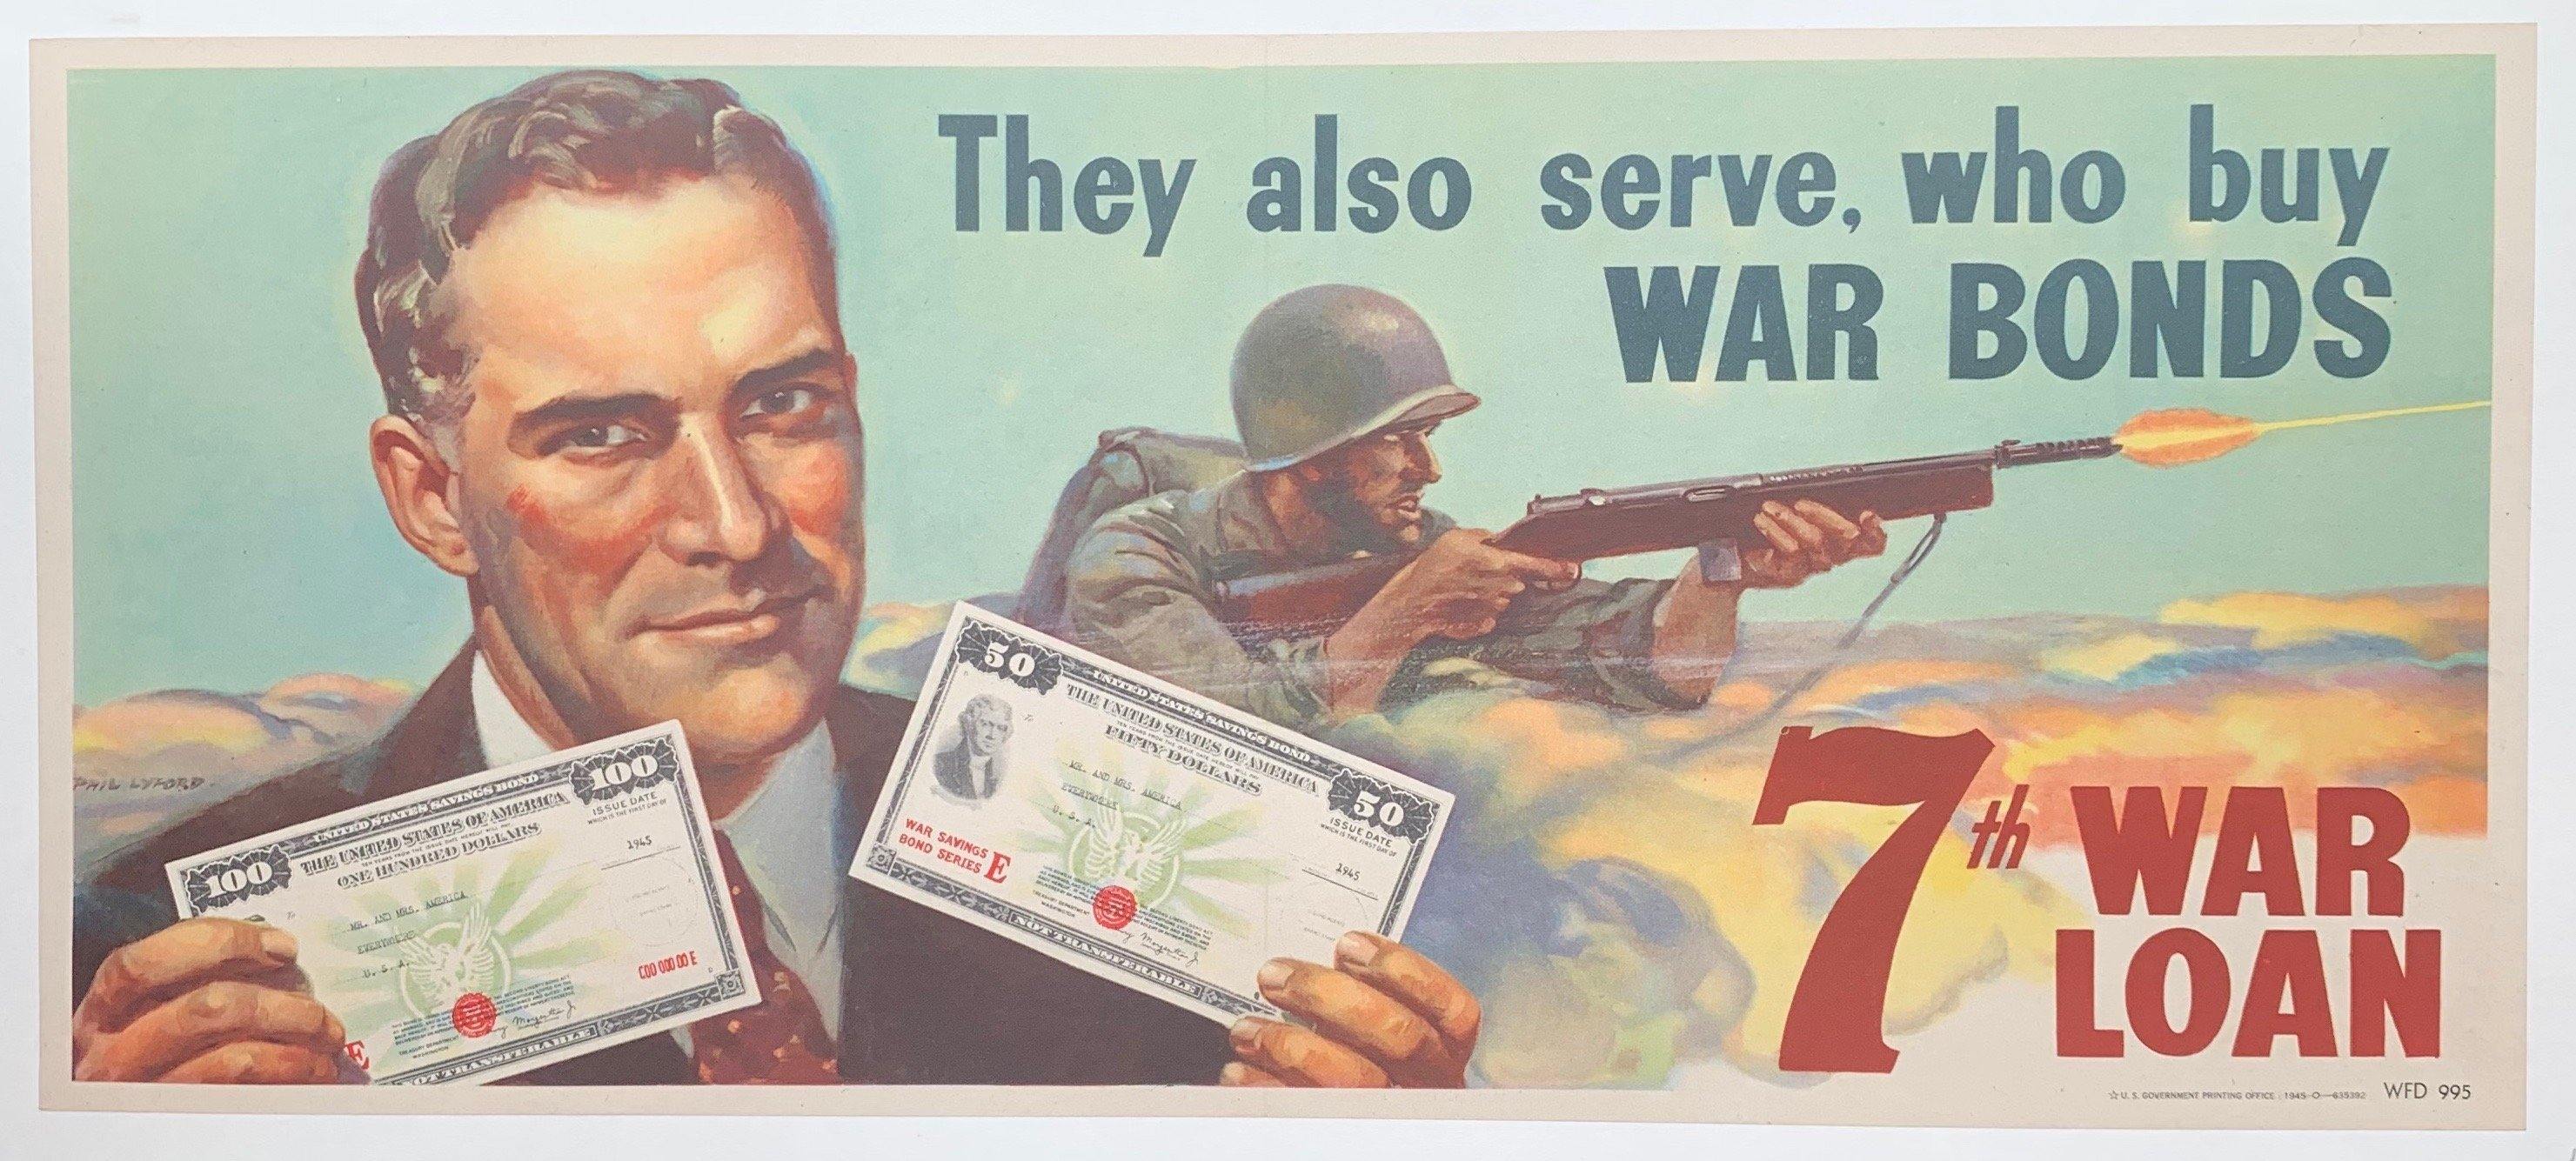 They also serve, who buy War Bonds. 7th War Loan. - Poster Museum